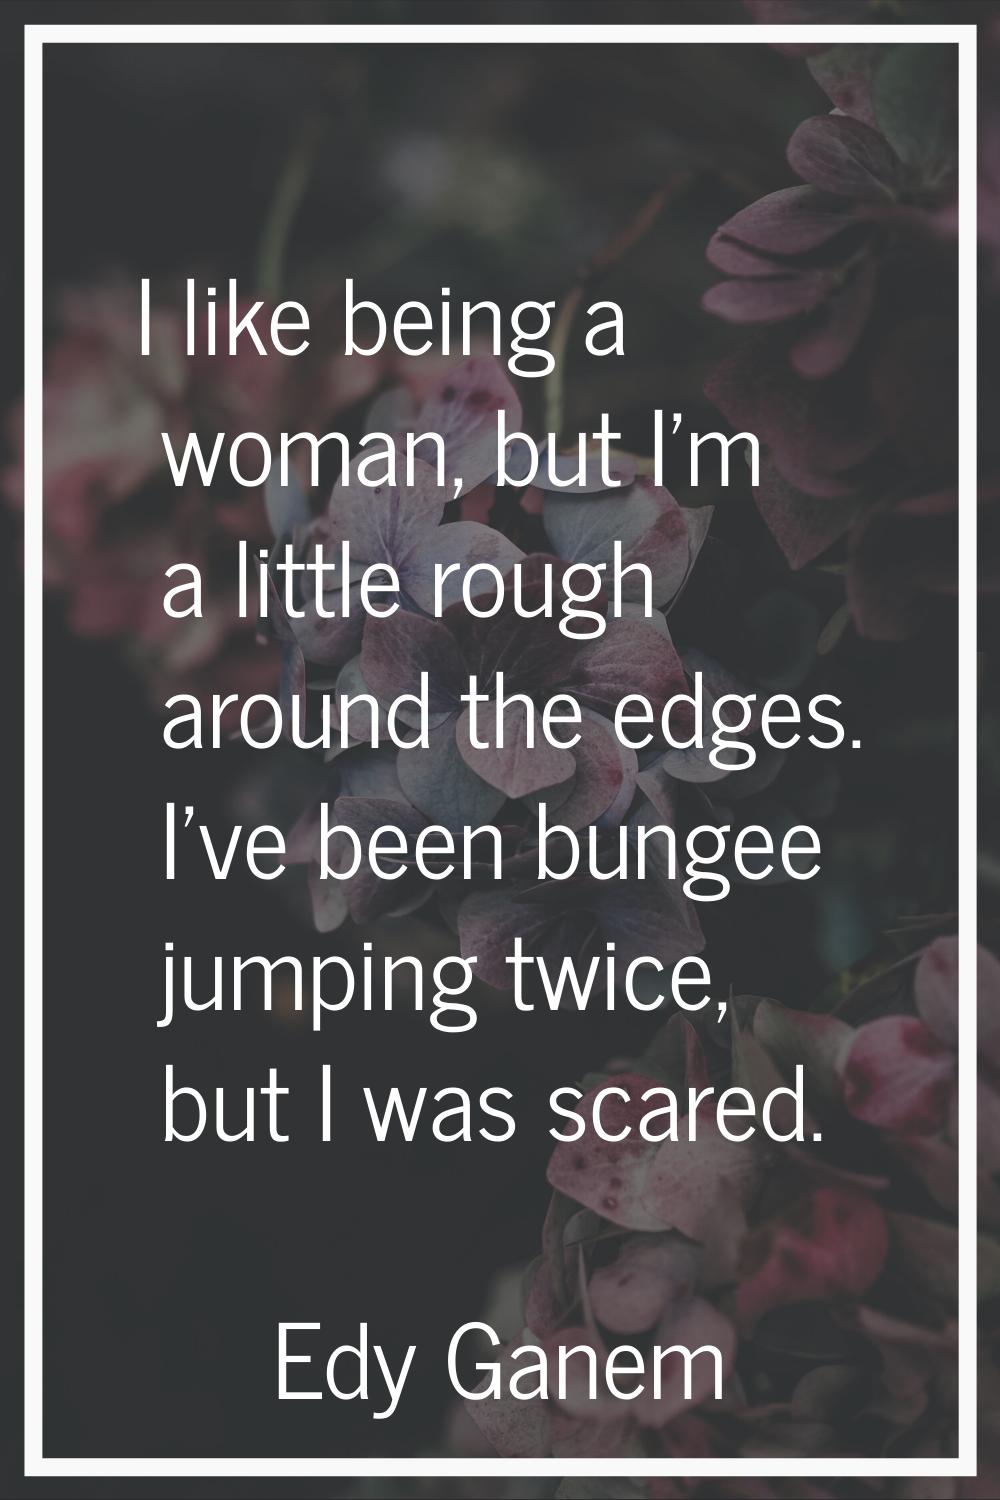 I like being a woman, but I'm a little rough around the edges. I've been bungee jumping twice, but 